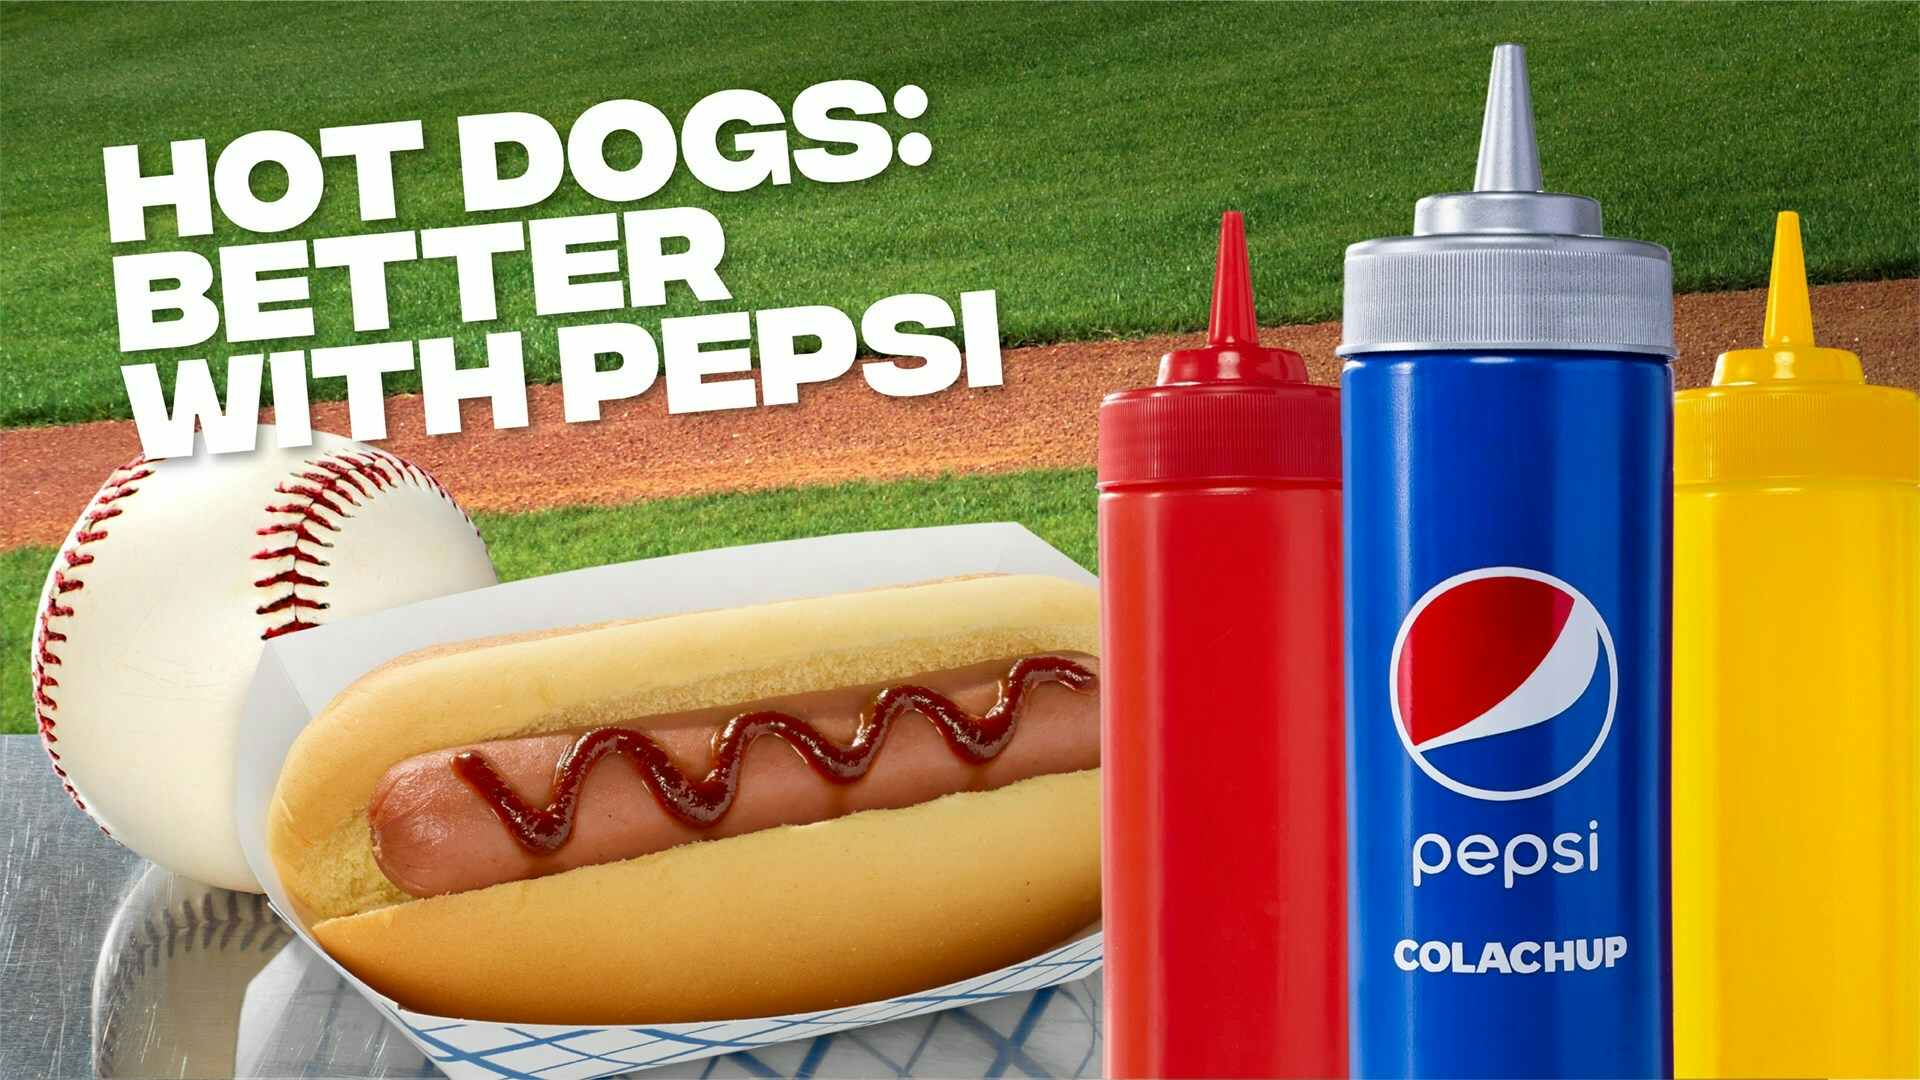 A hot dog, various condiments, and the new Pepsi-infused "Colachup